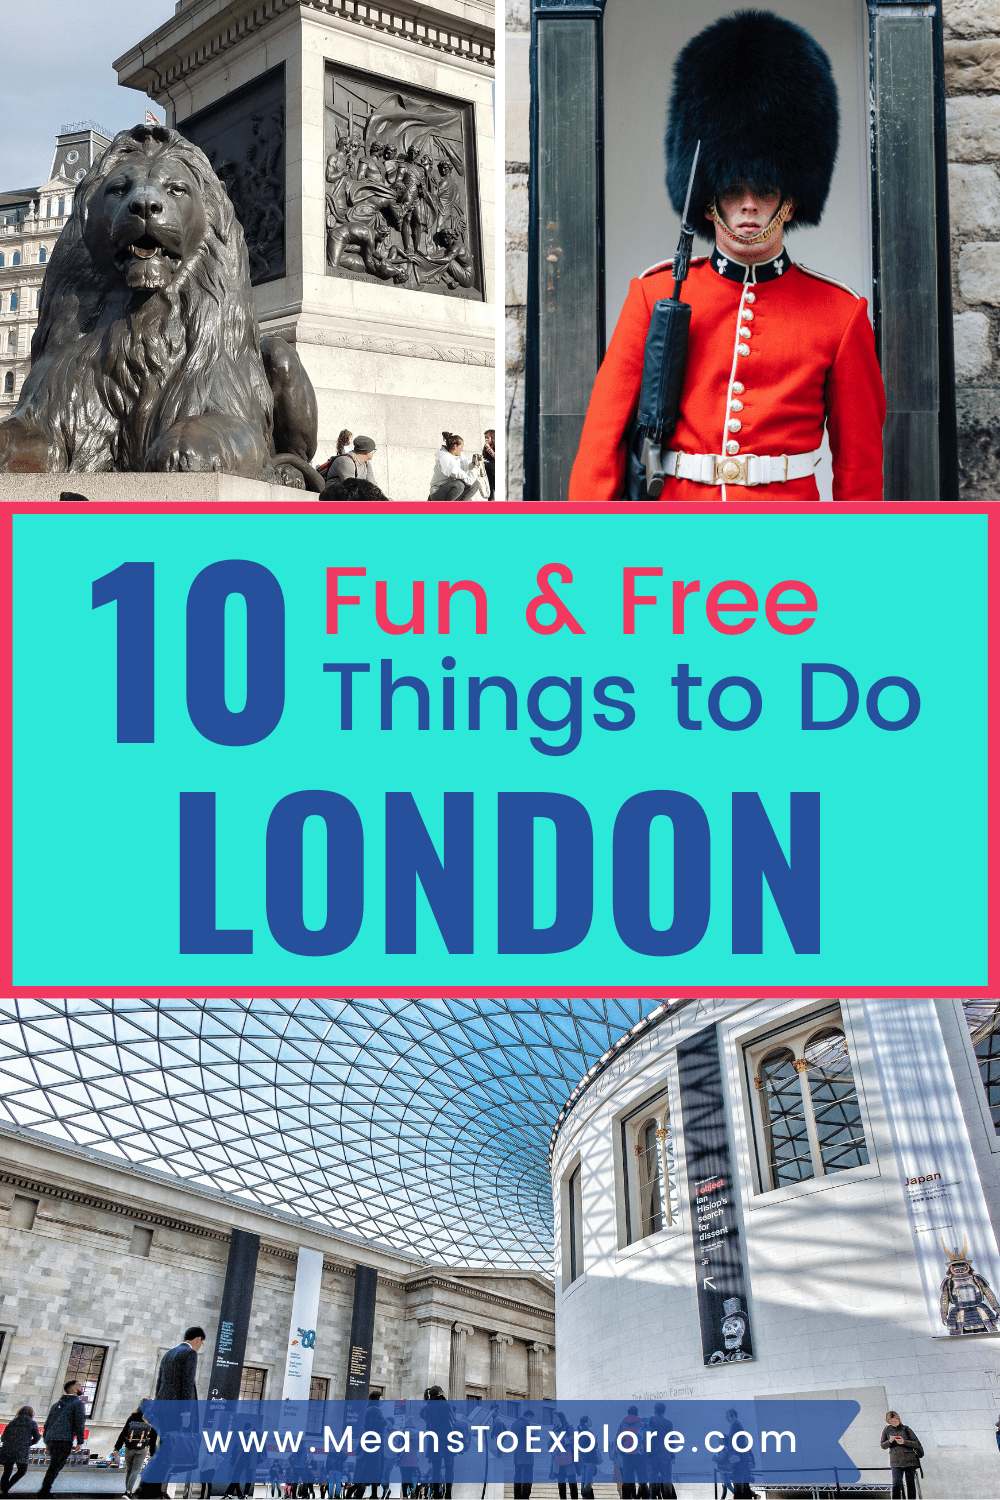 10 Fun (And Free!) Things to Do in London